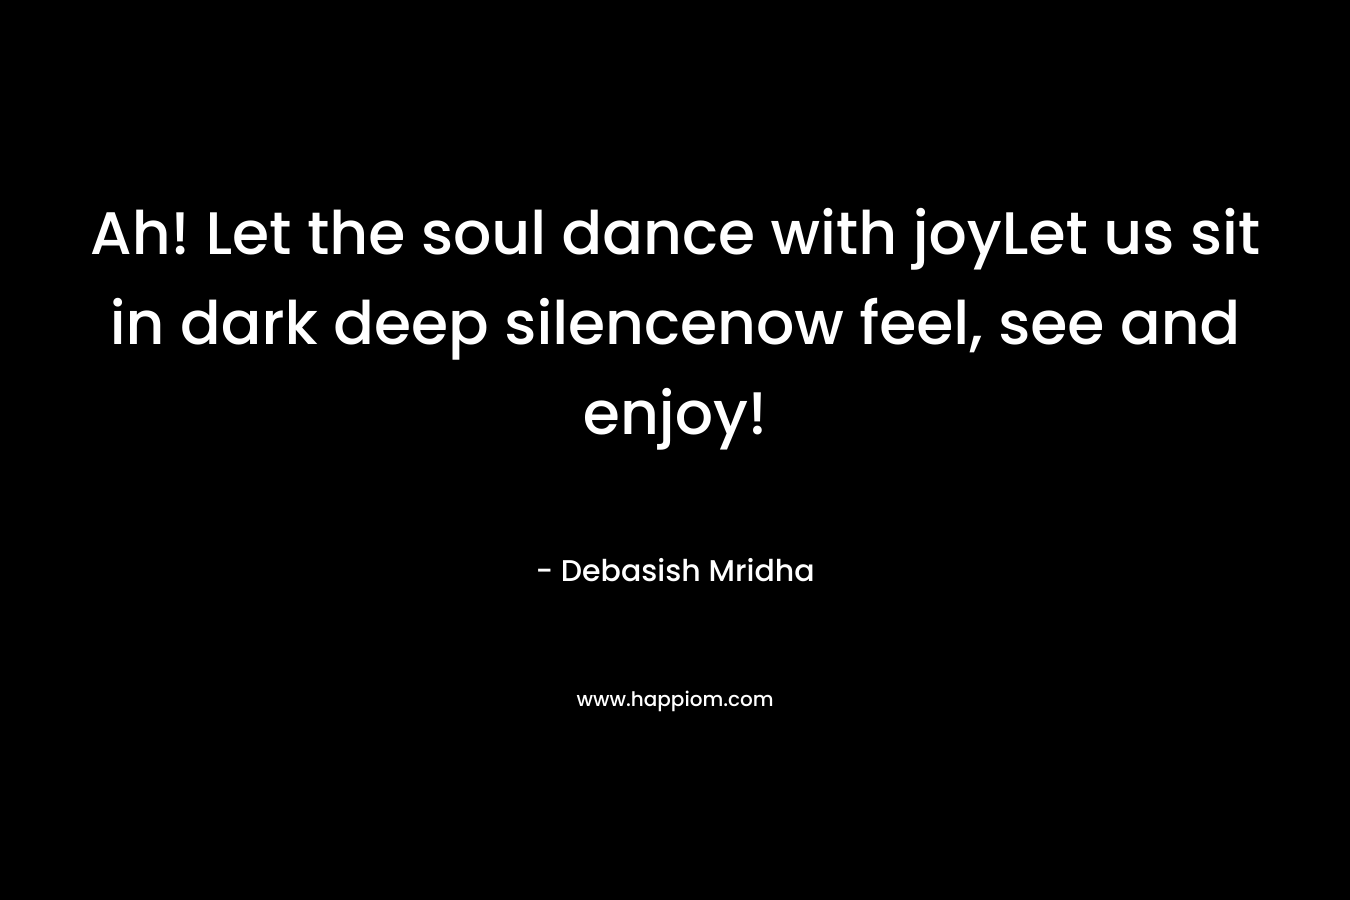 Ah! Let the soul dance with joyLet us sit in dark deep silencenow feel, see and enjoy!